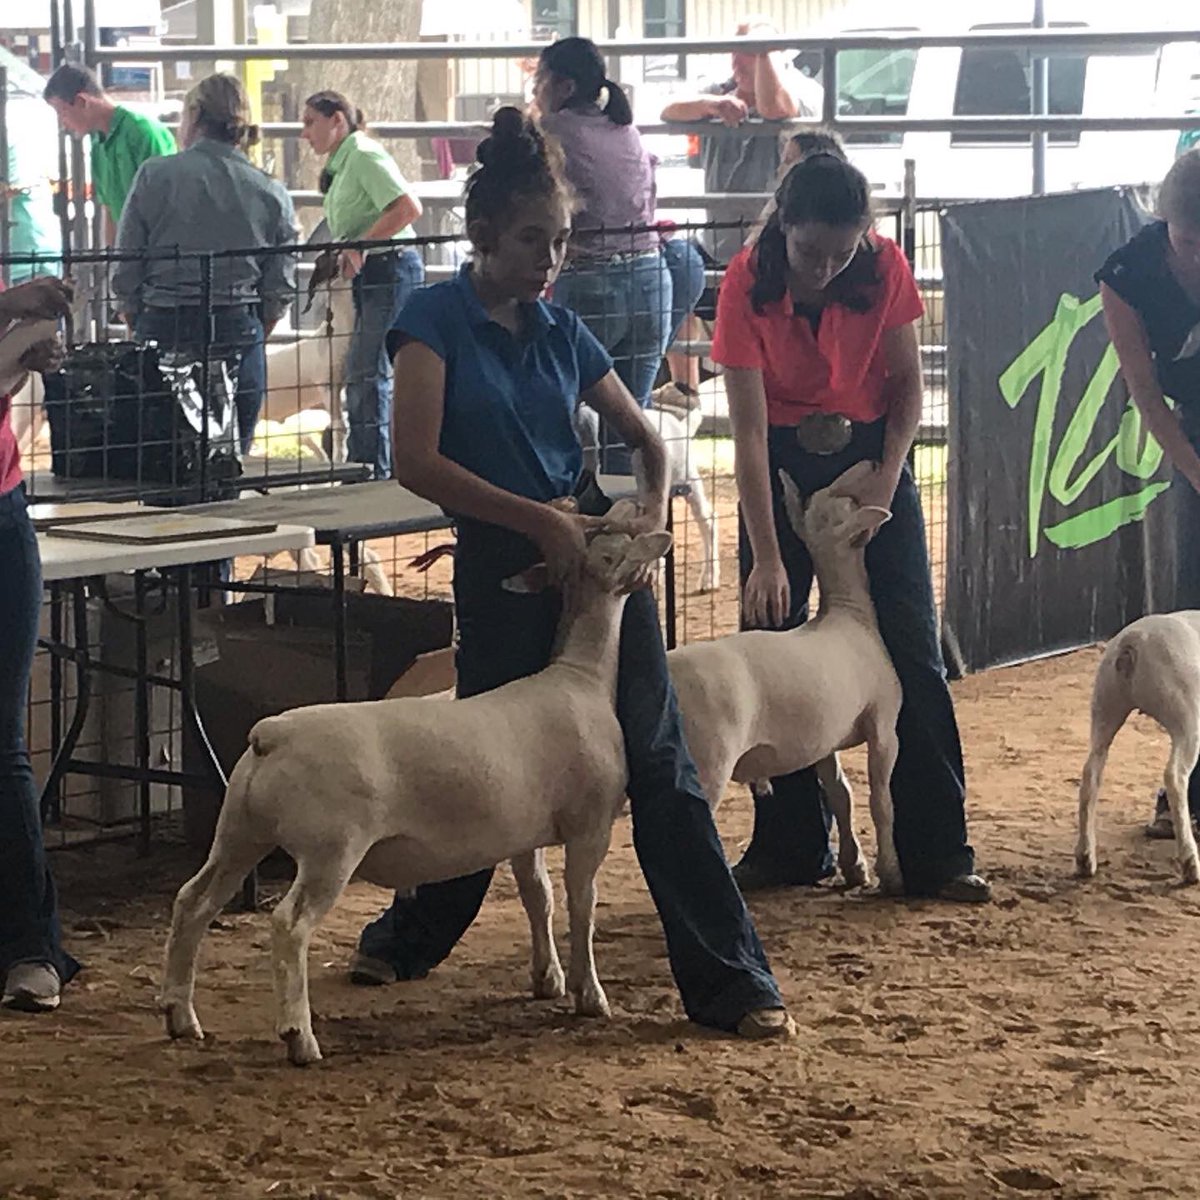 I love that we are busy again watching @kiersten04__  show her lambs. #lovelambs #4Hlife #dorpers